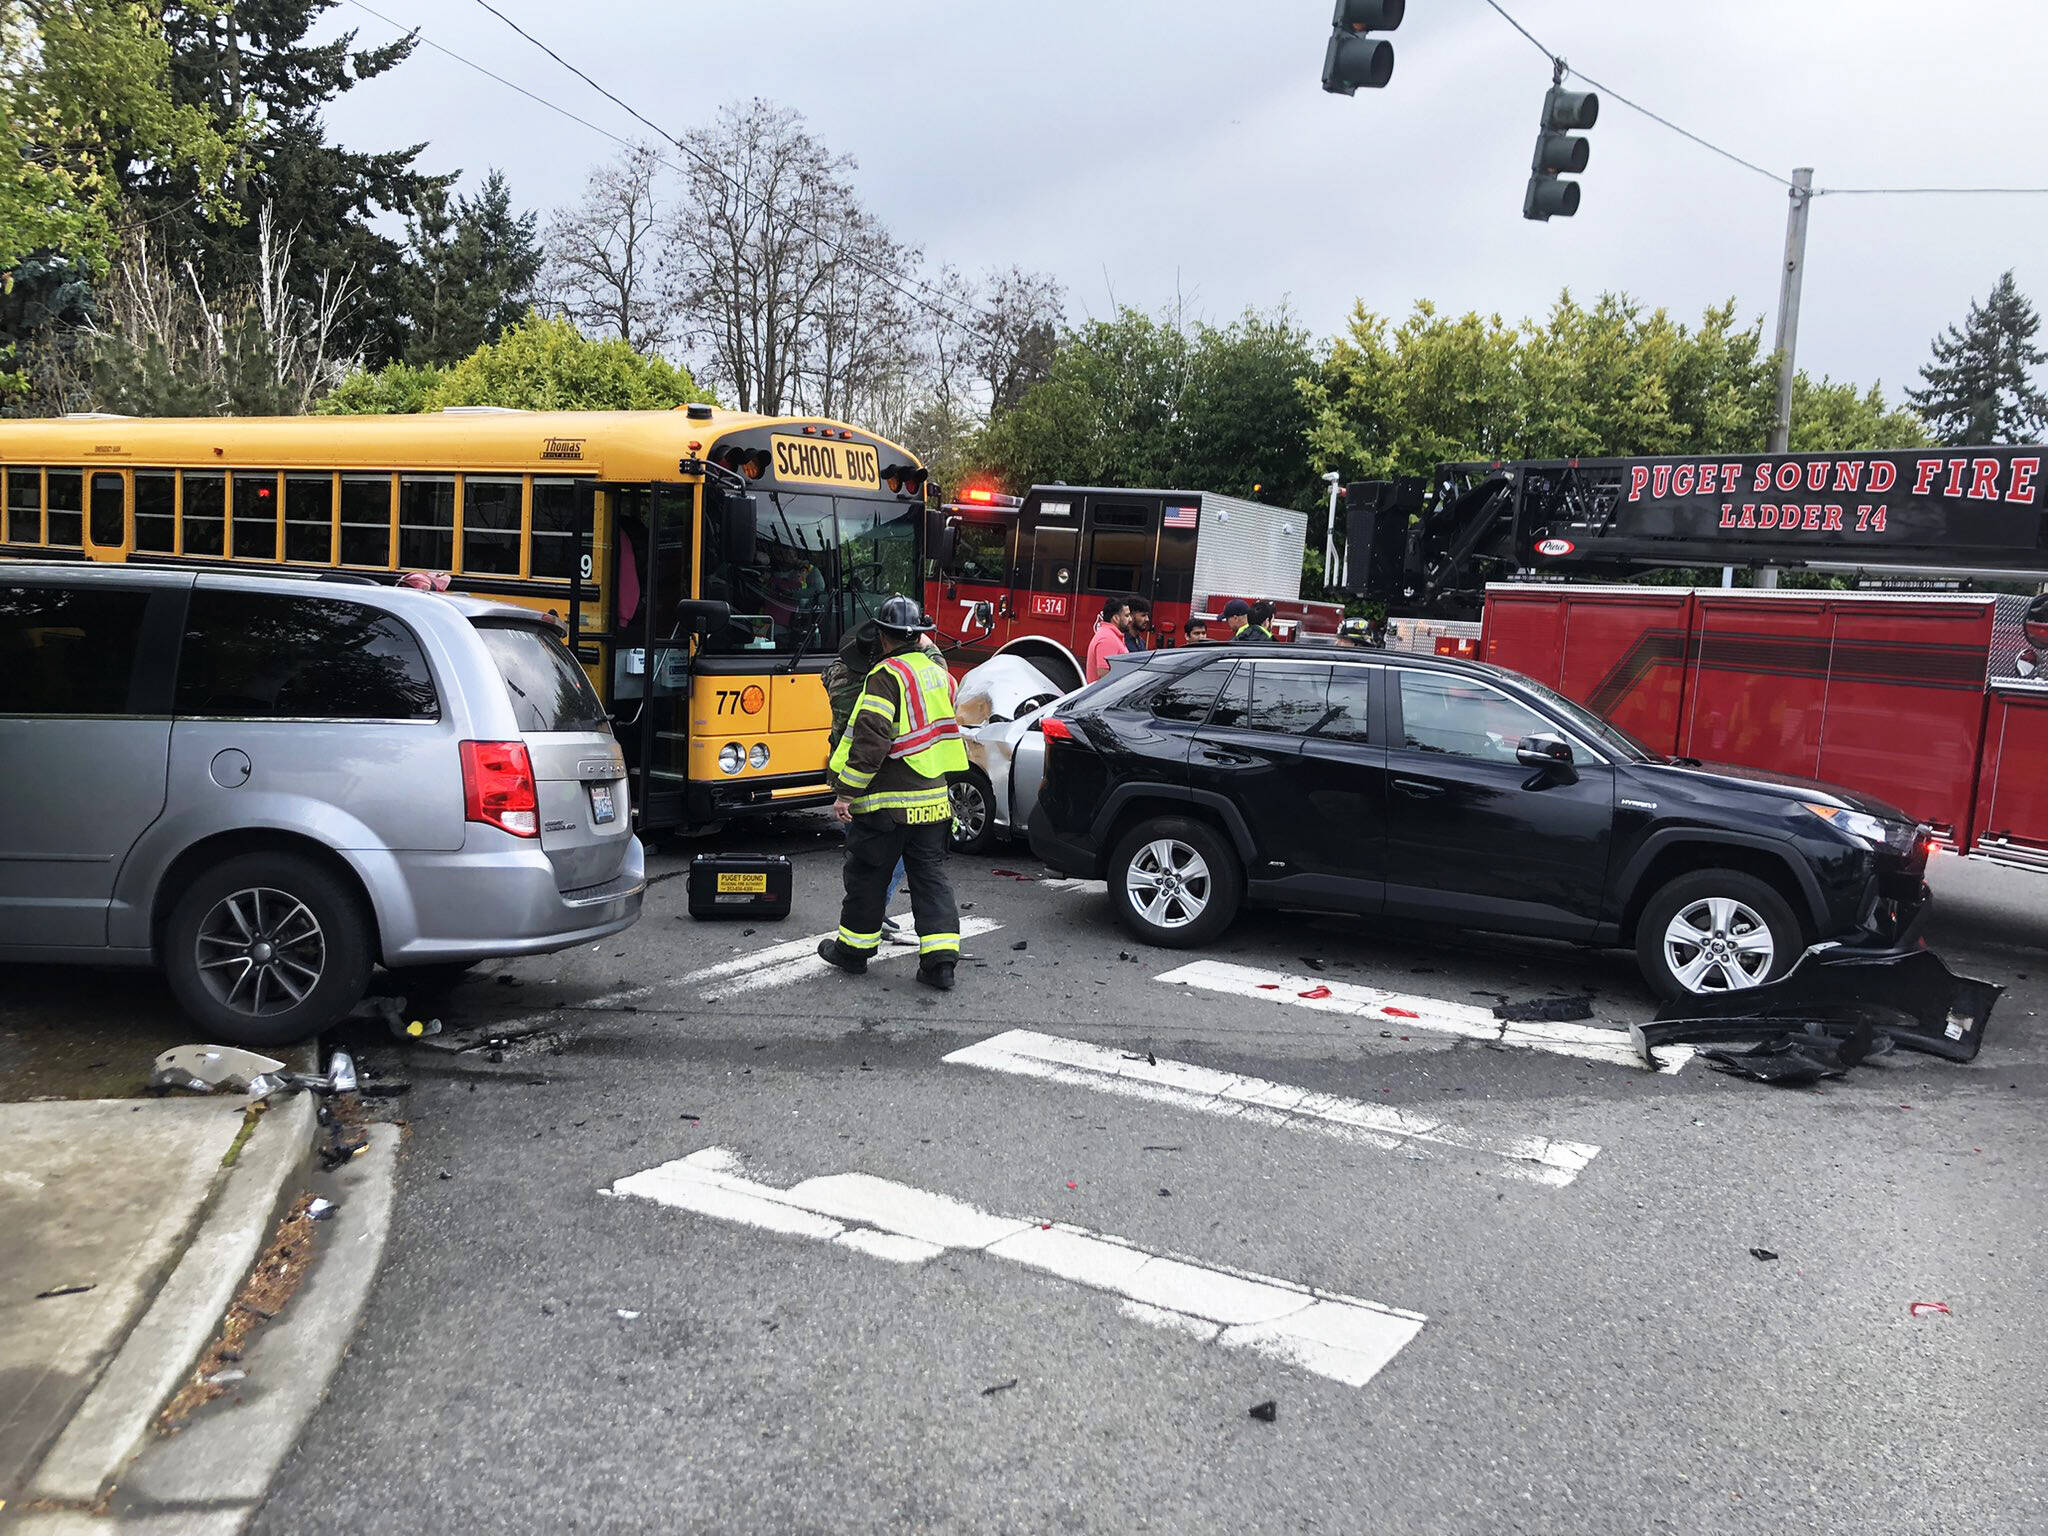 A school bus and three other vehicles were involved in a crash Friday afternoon, April 8 in the 9400 block of South 240th Street. There were no injuries. COURTESY PHOTO, Puget Sound Fire